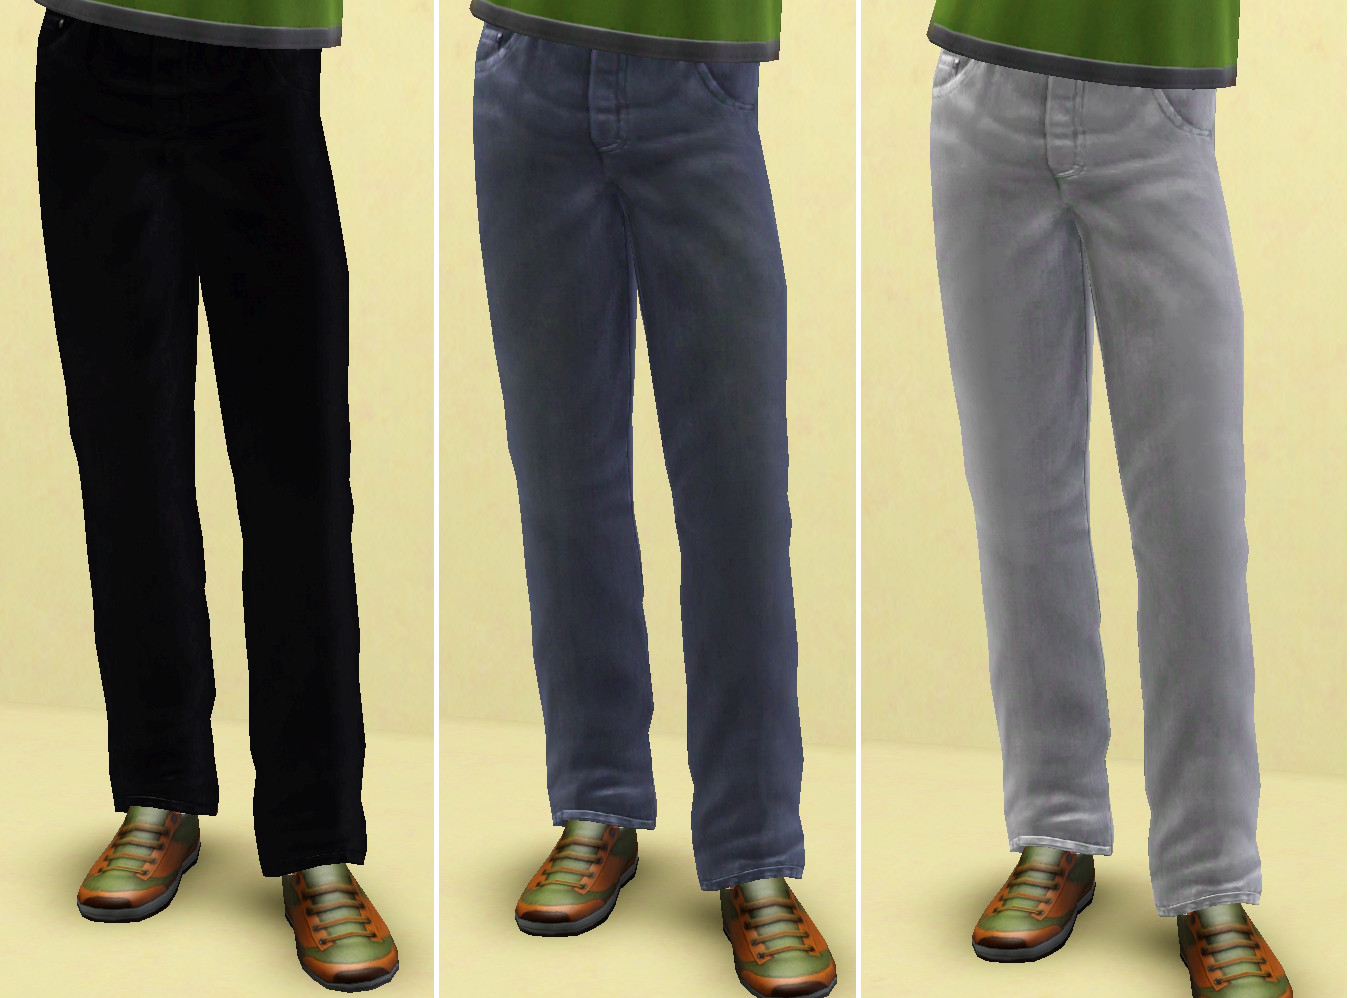 Mod The Sims - Teen Male Celeb Jeans